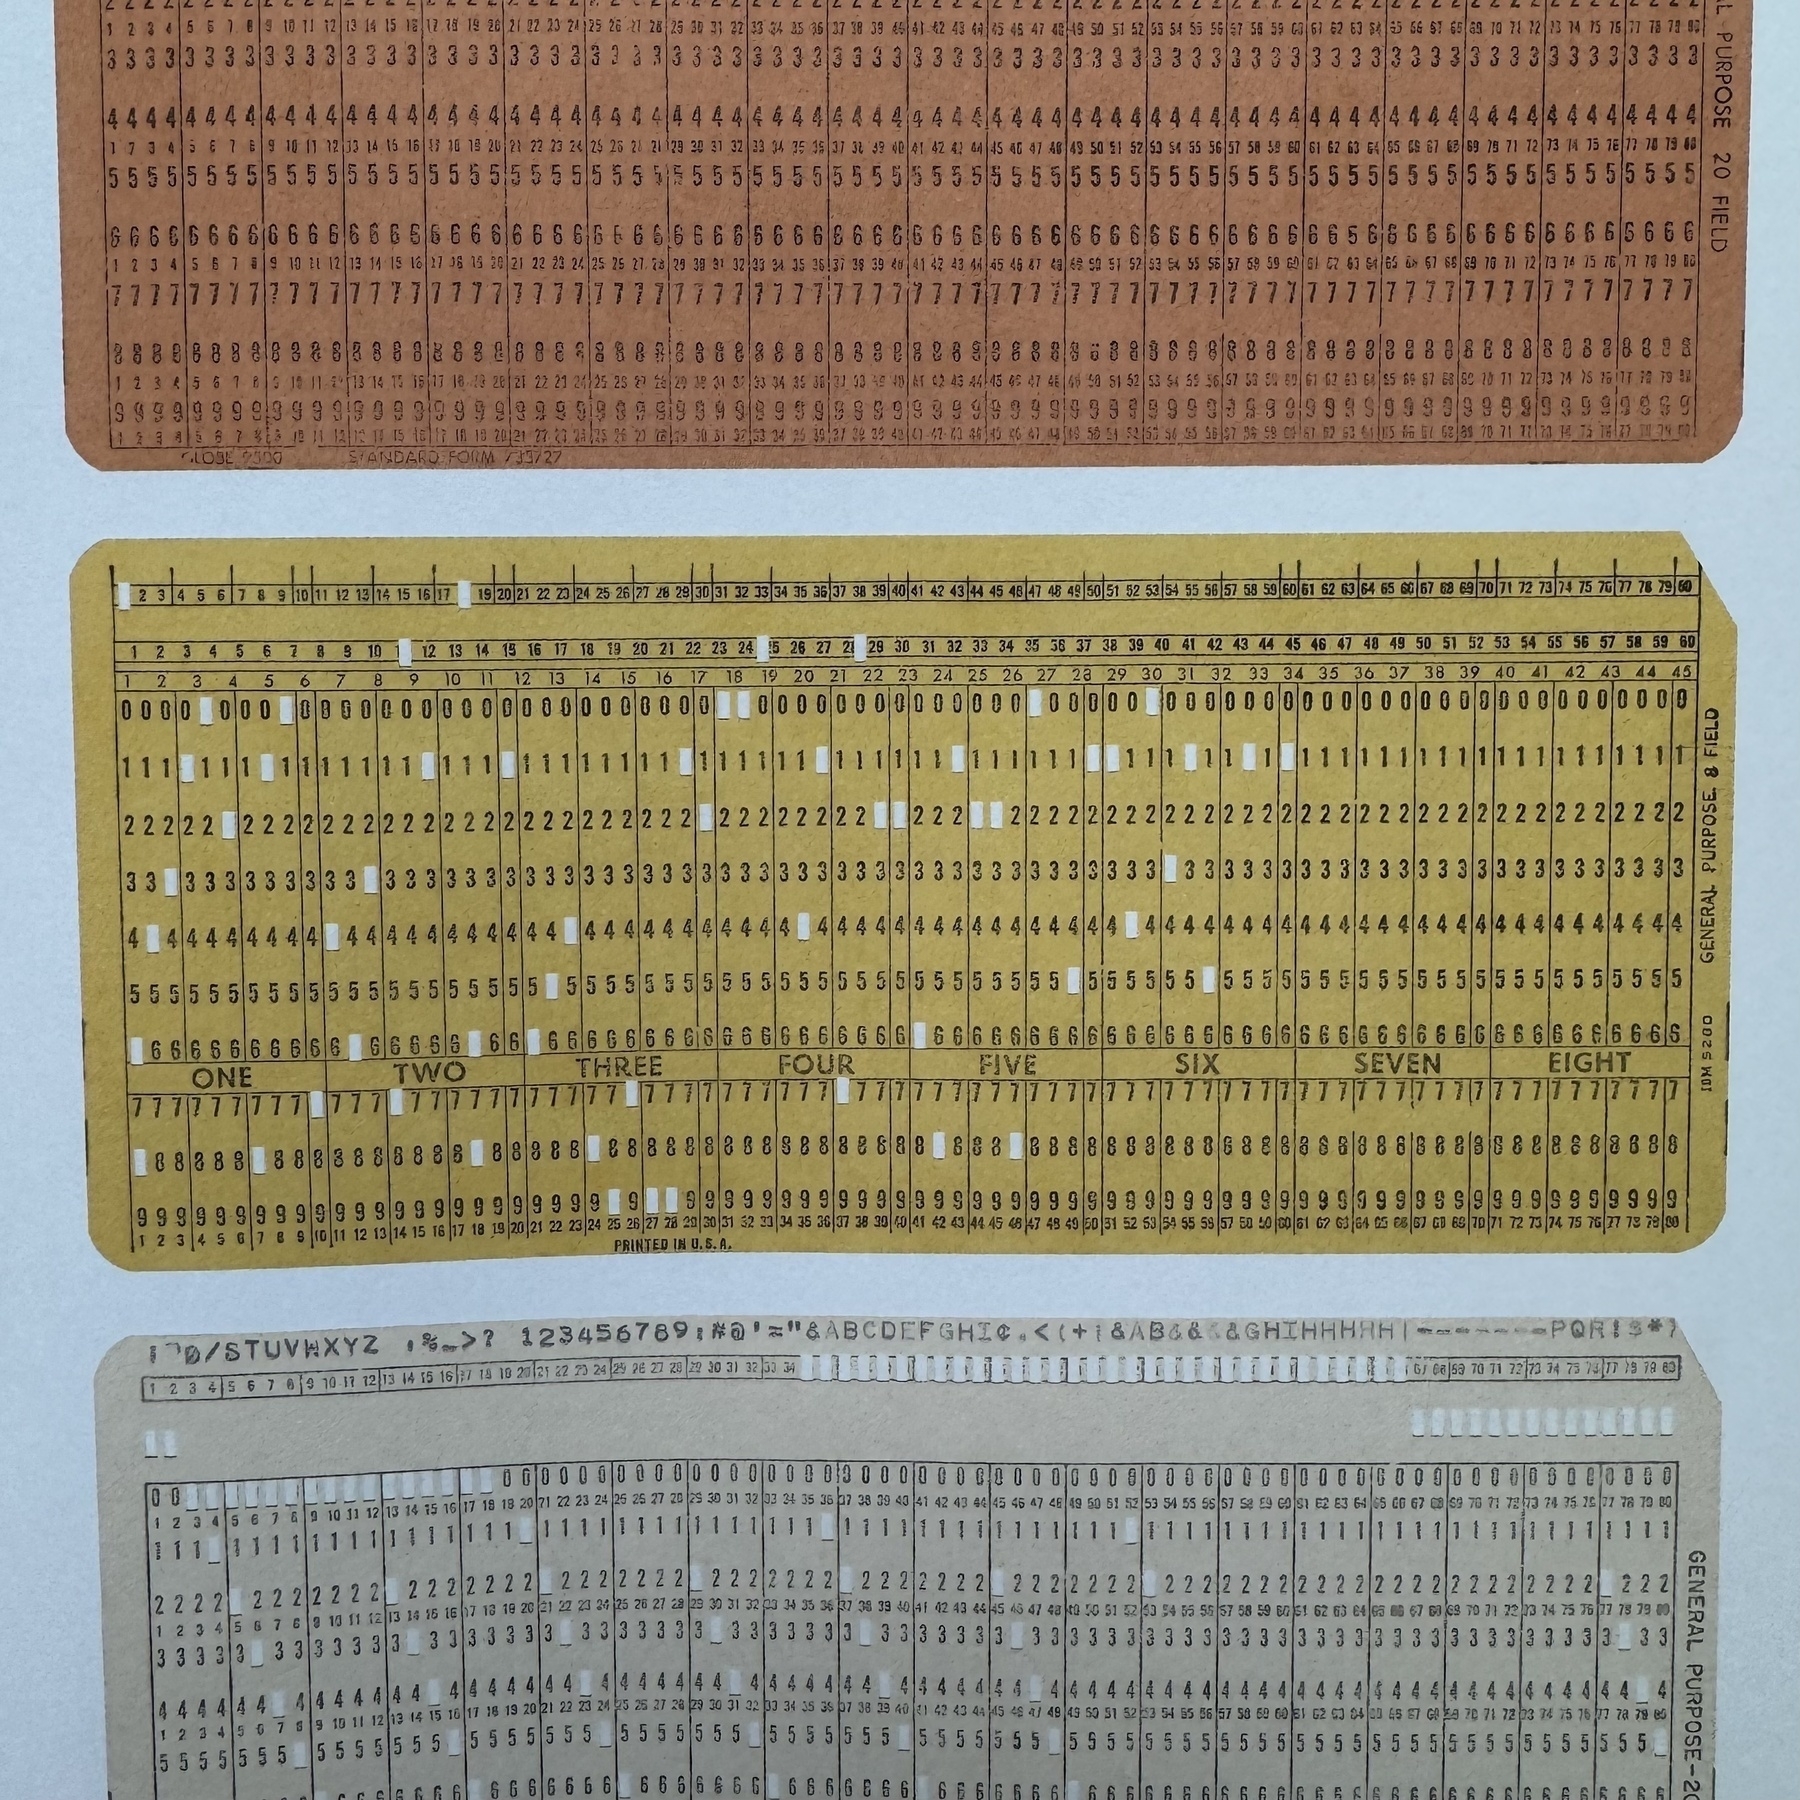 Vintage rectangular punch cards from the early computing era, featuring rows of tiny numbers with a smattering of punched holes to represent data.